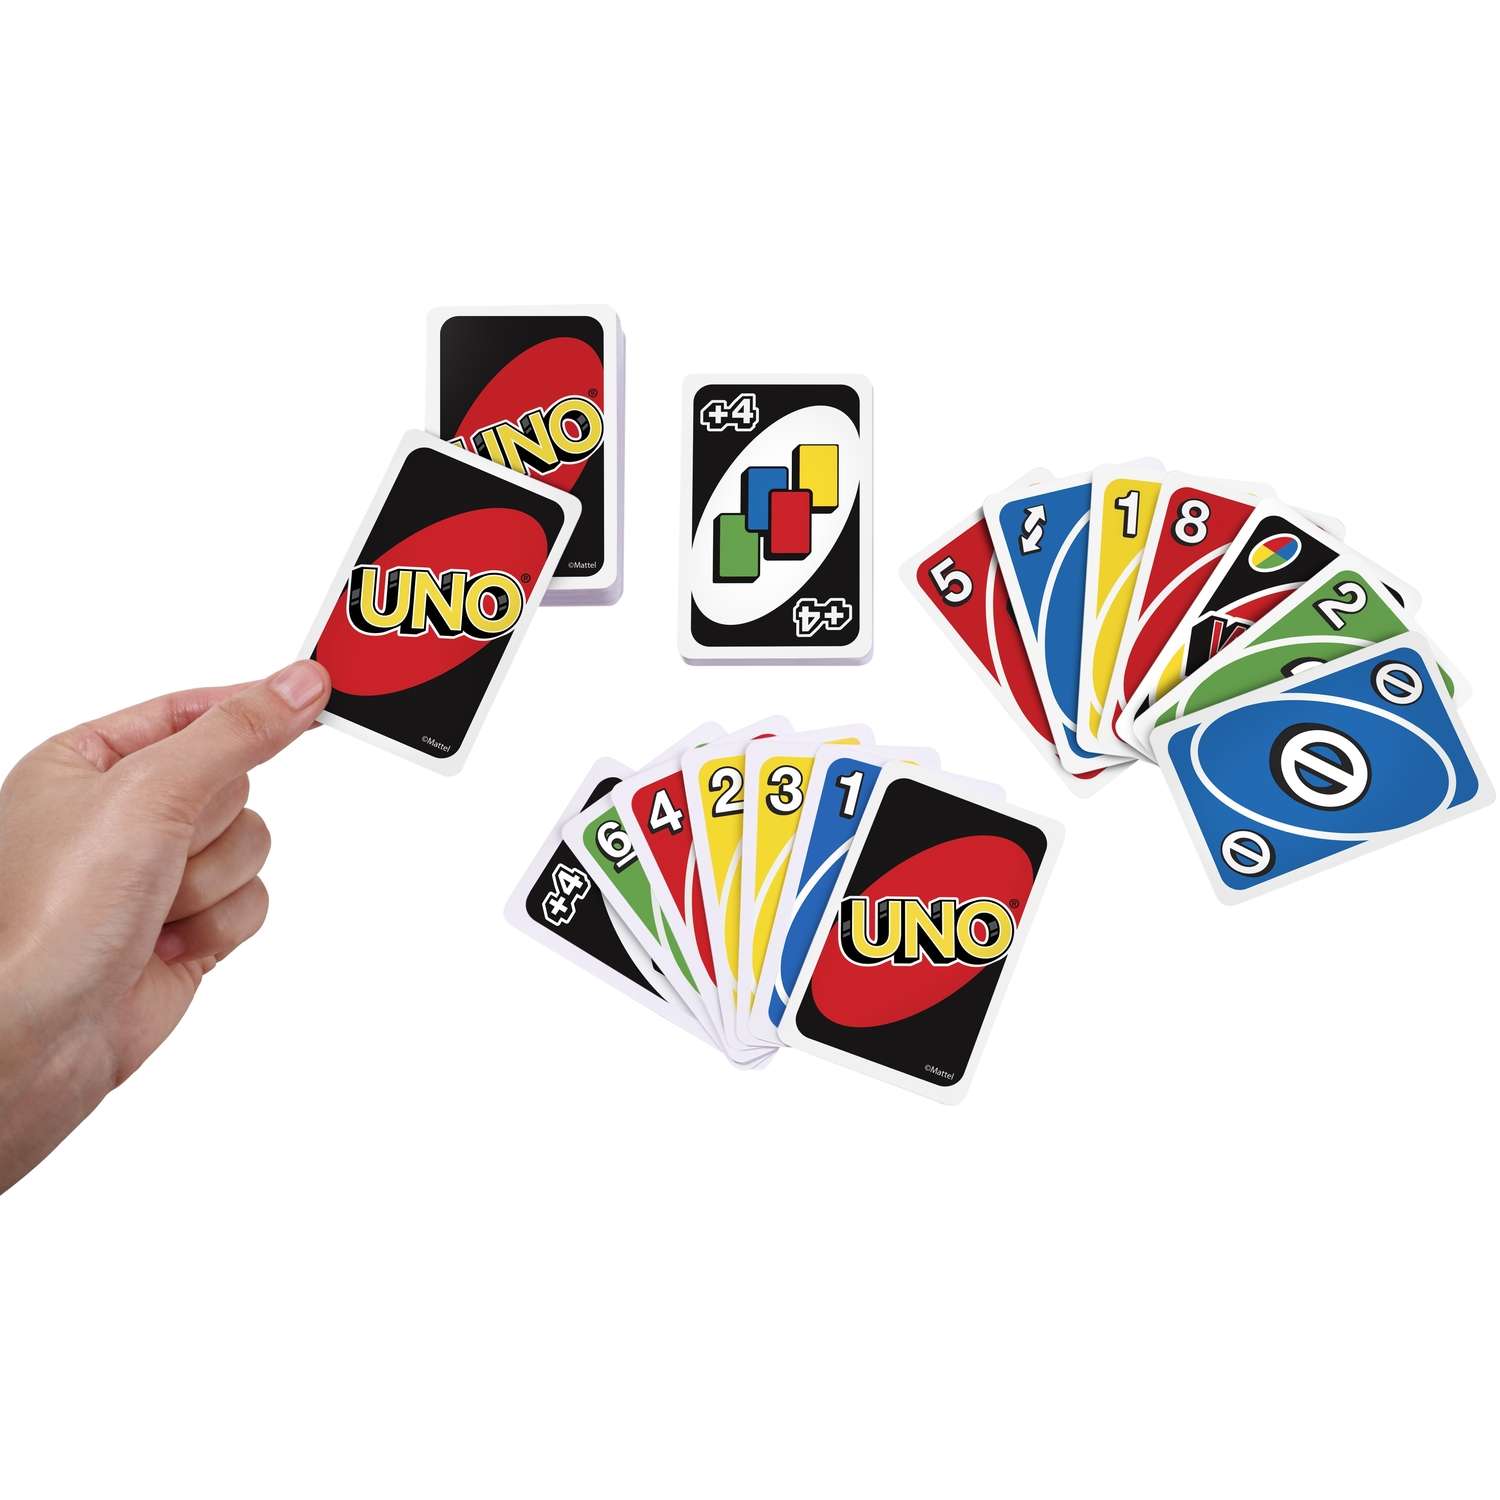 UNO! Mobile Fun Pack is Live!, party, skill